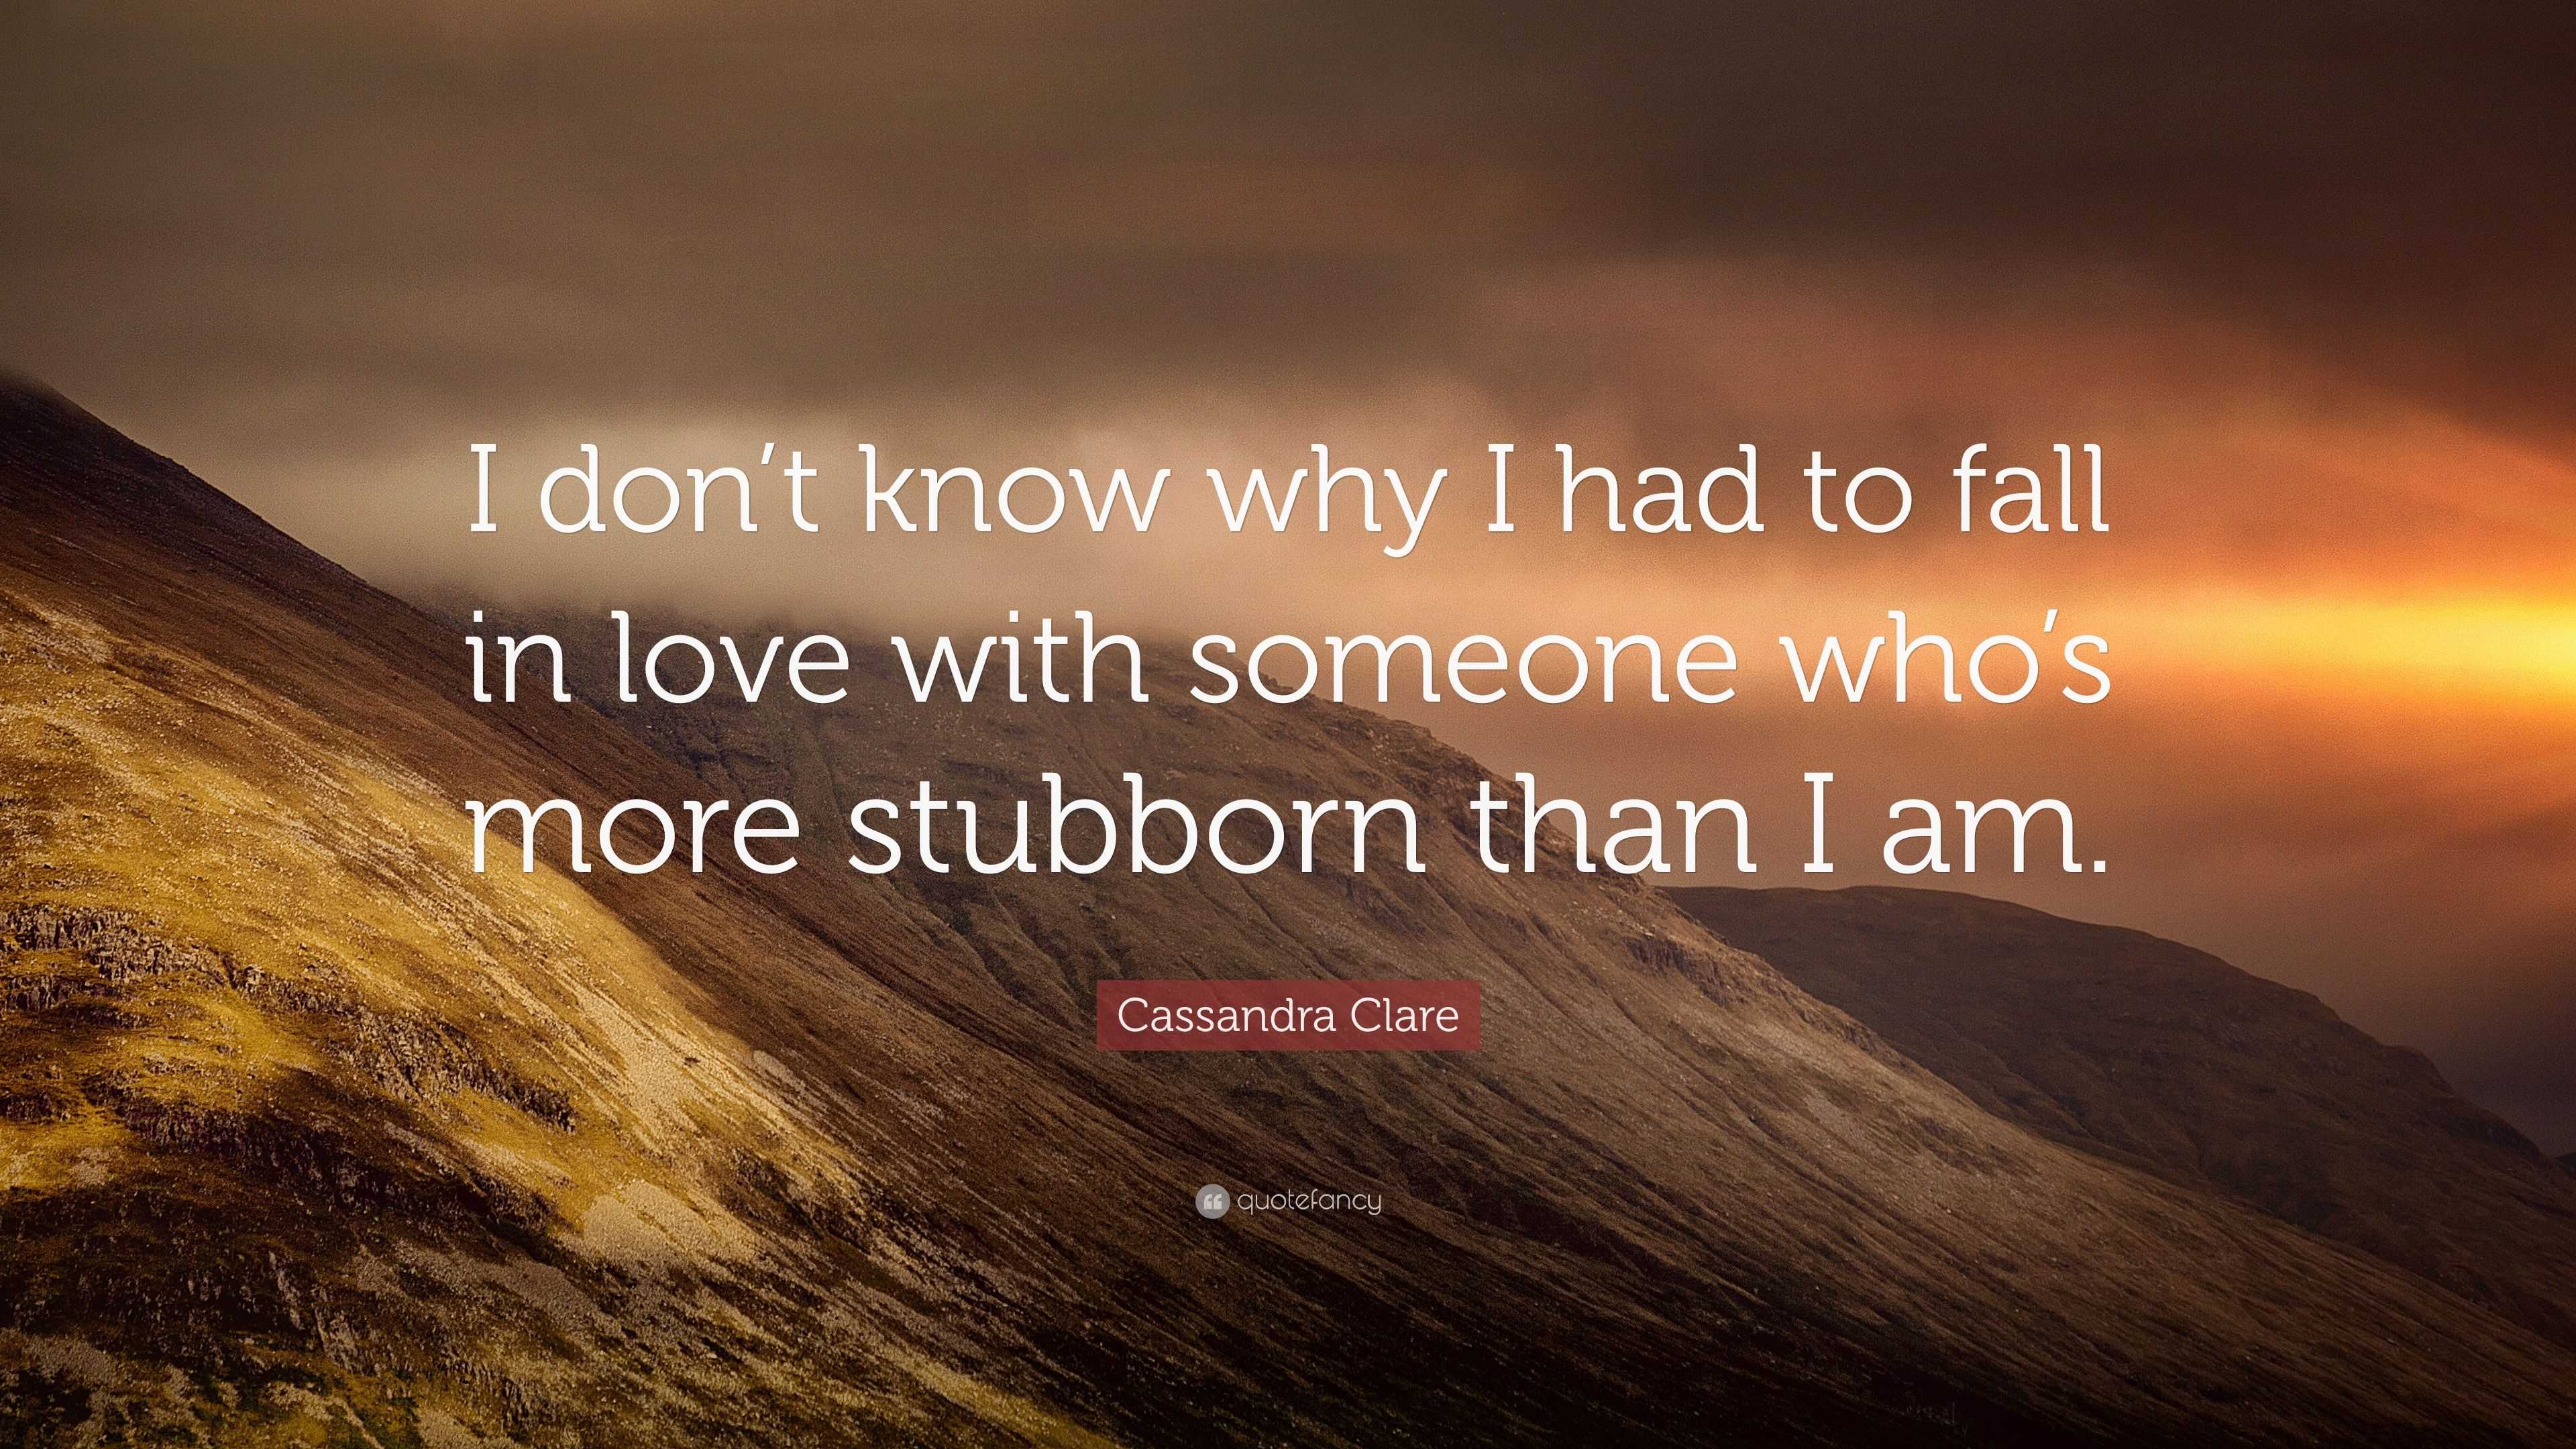 Cassandra Clare Quote I Don T Know Why I Had To Fall In Love With Someone Who S More Stubborn Than I Am 6 Wallpapers Quotefancy